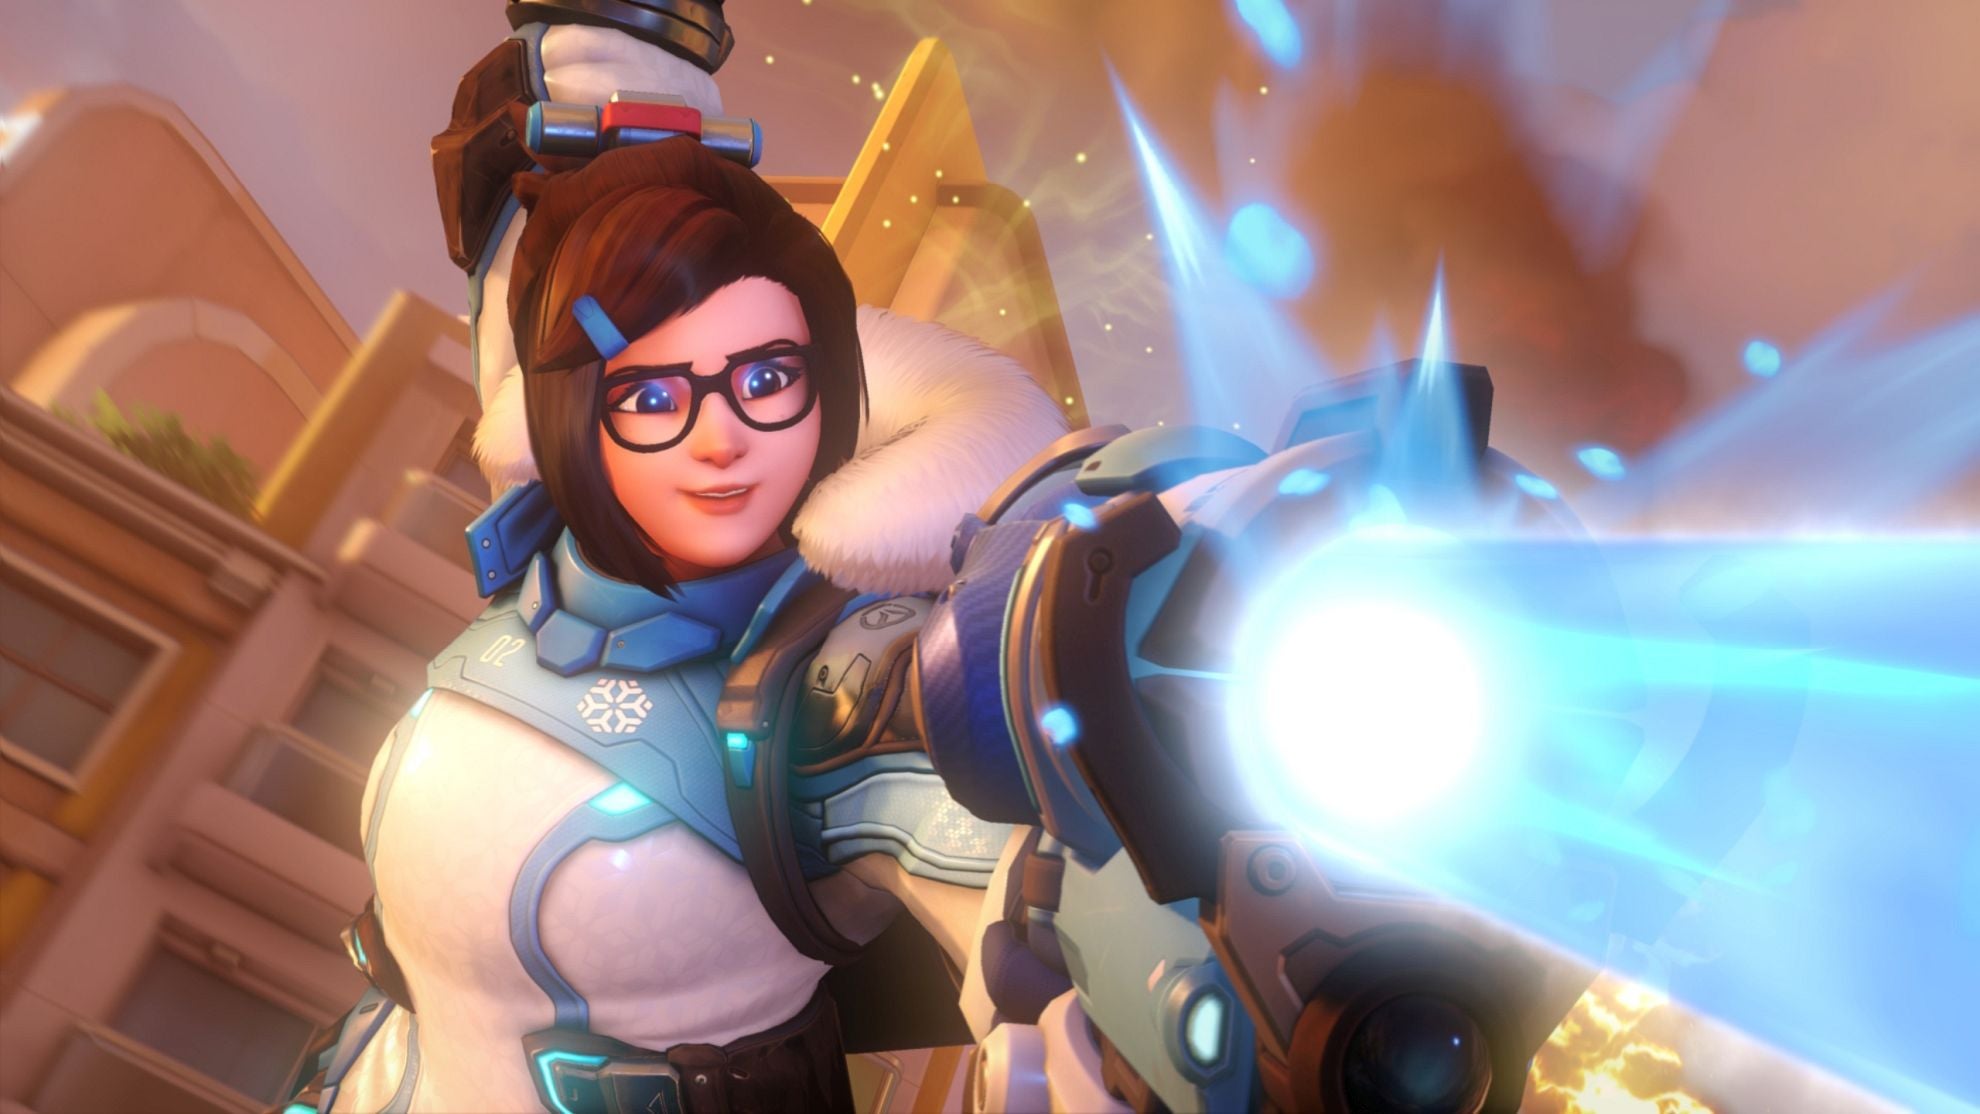 Image for Overwatch 2 game director says leaks are "demoralising" to the team